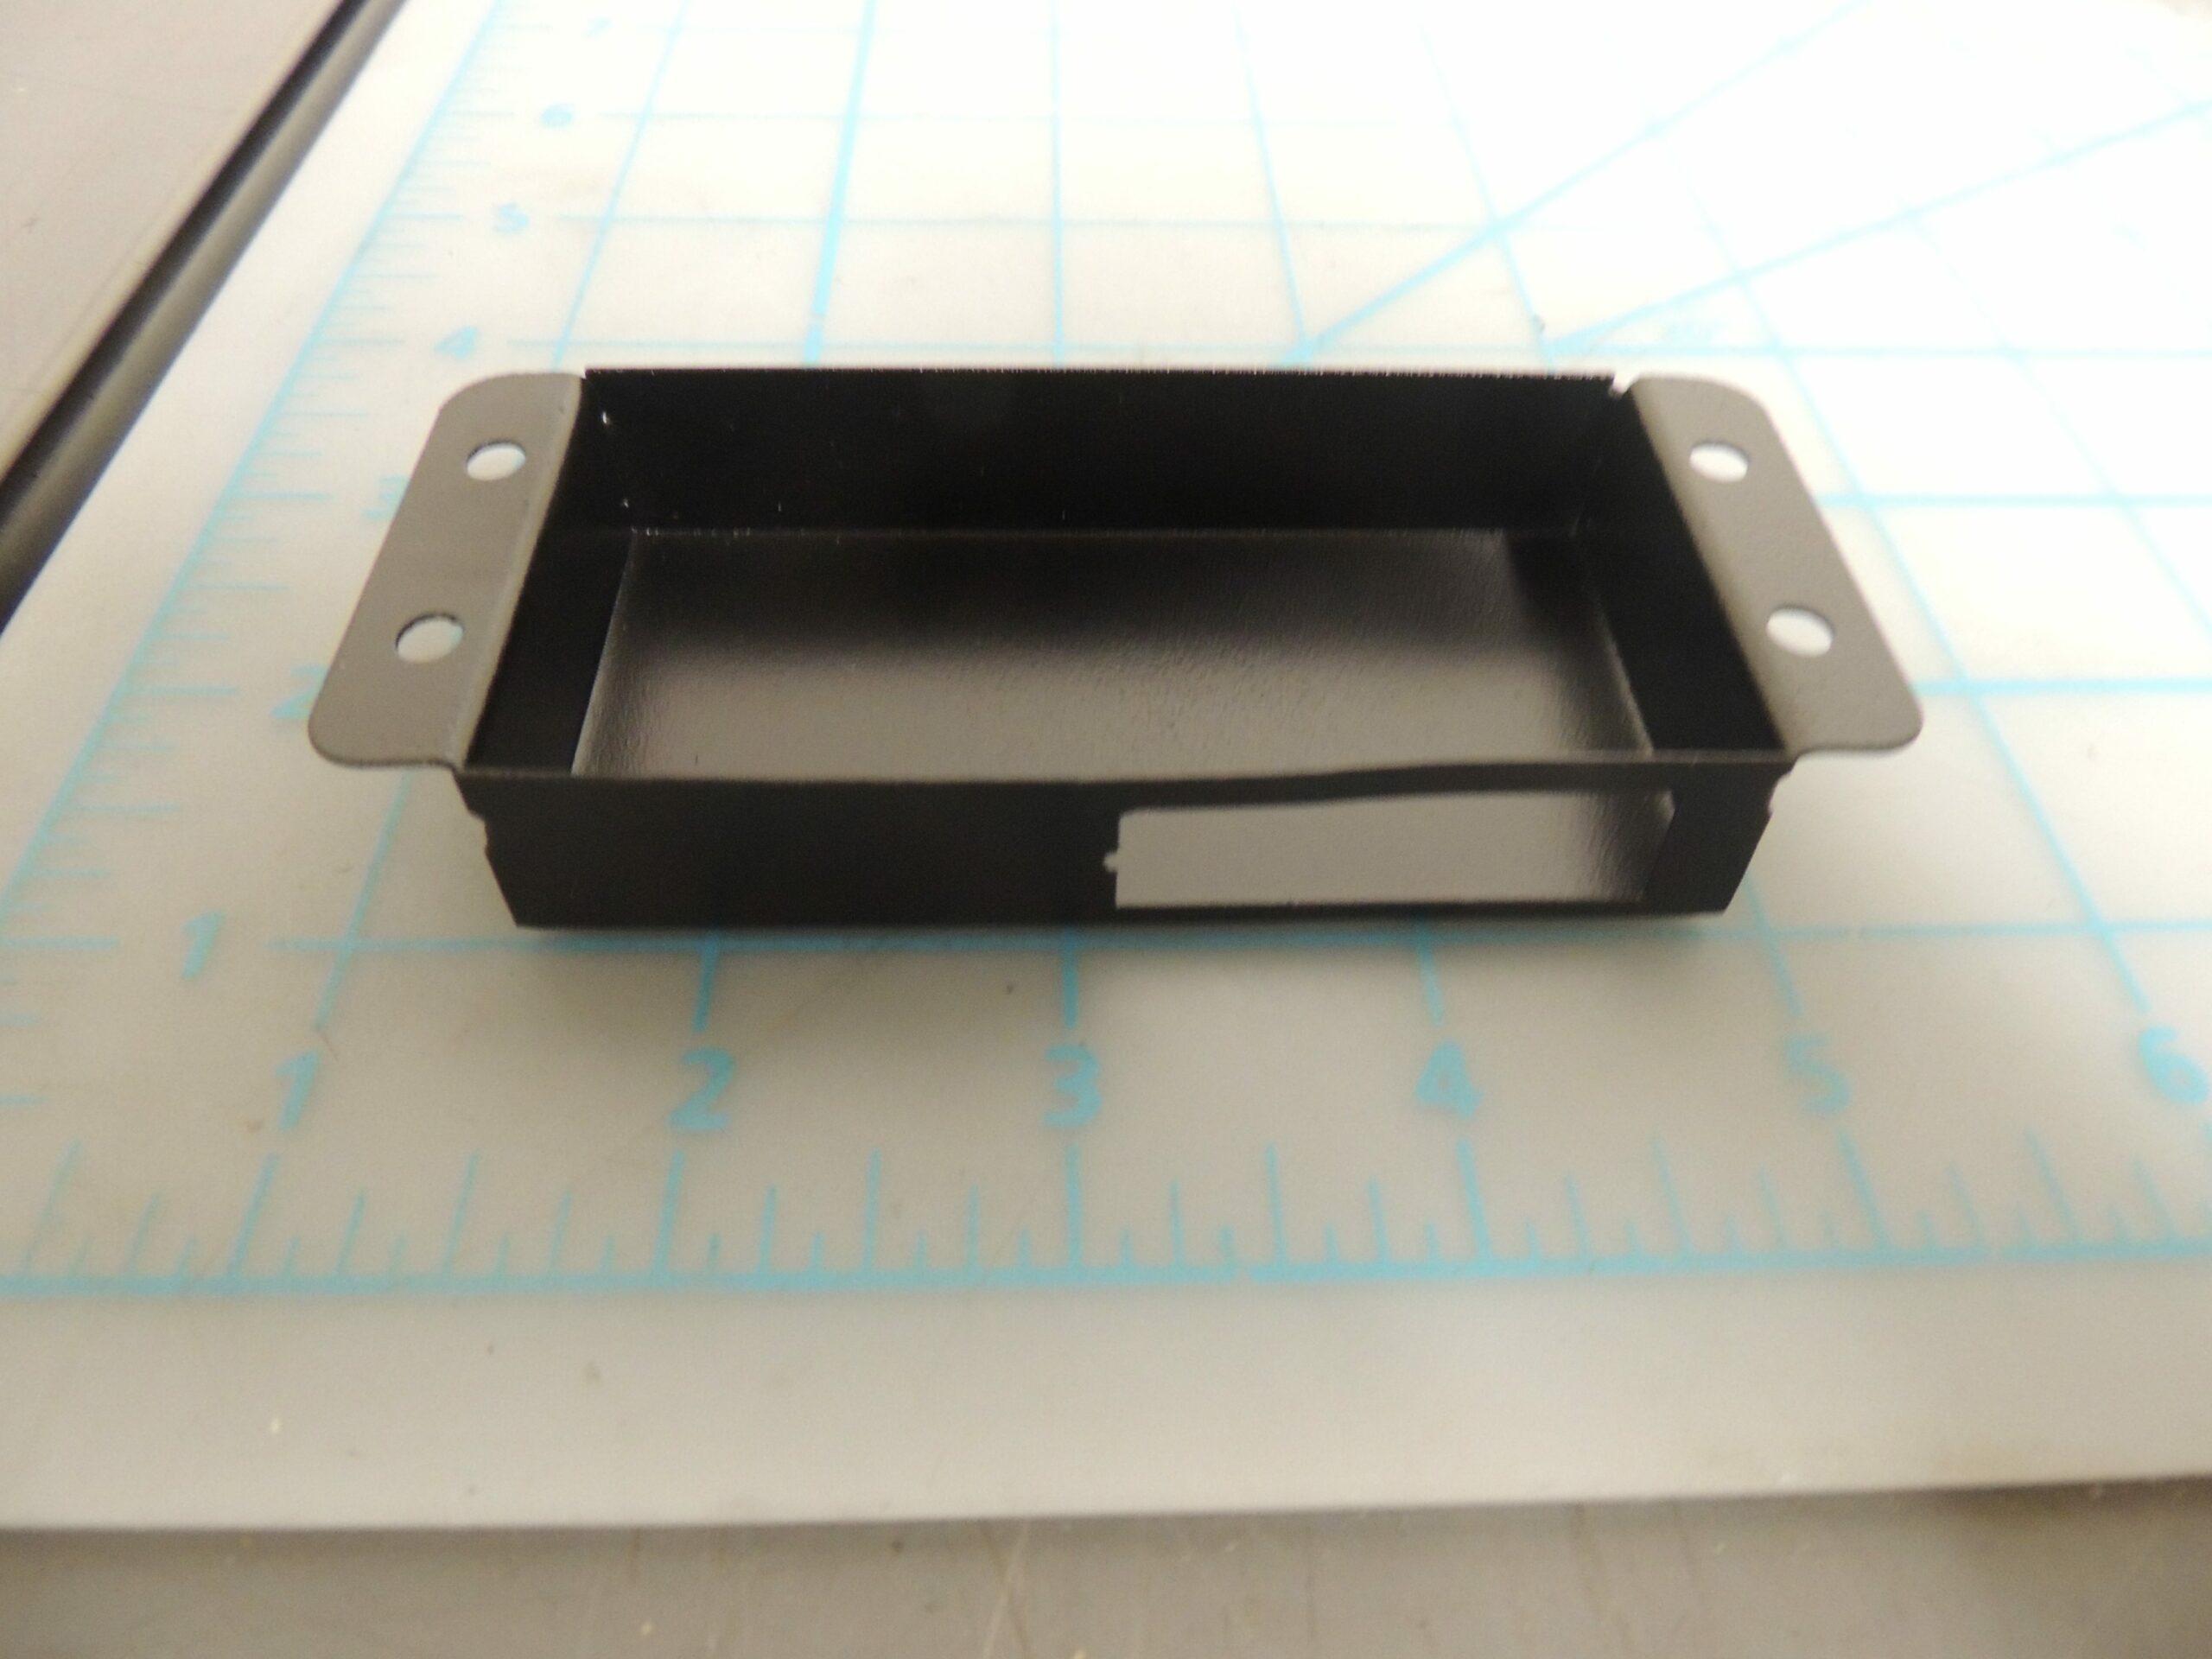 Drip Tray – Danby Appliance Parts